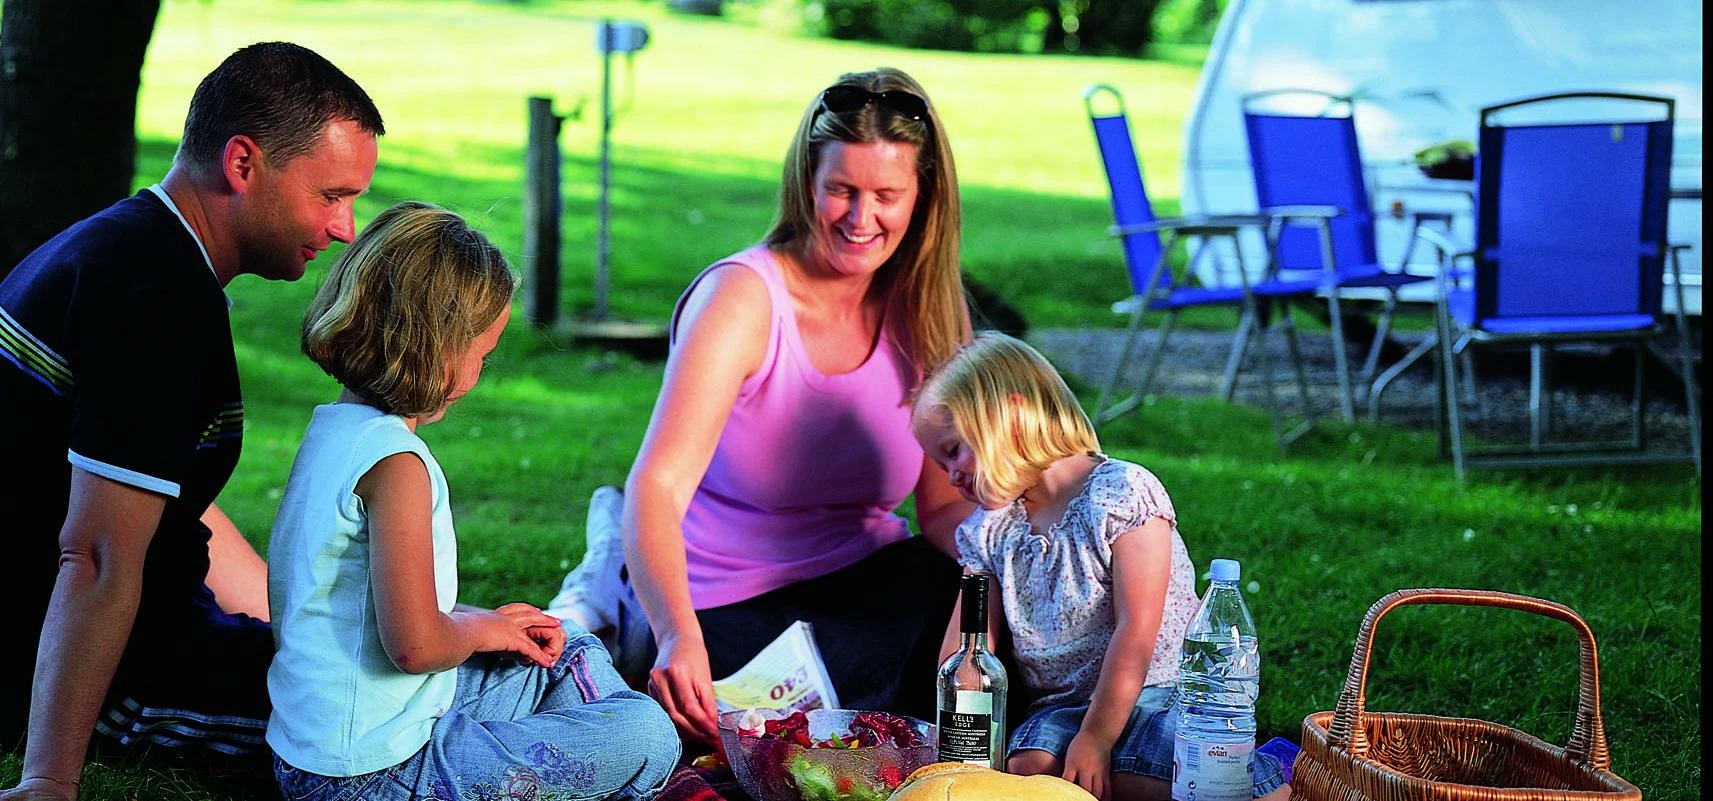 Camping and caravan holidays in the North East are growing in popularity, say parks